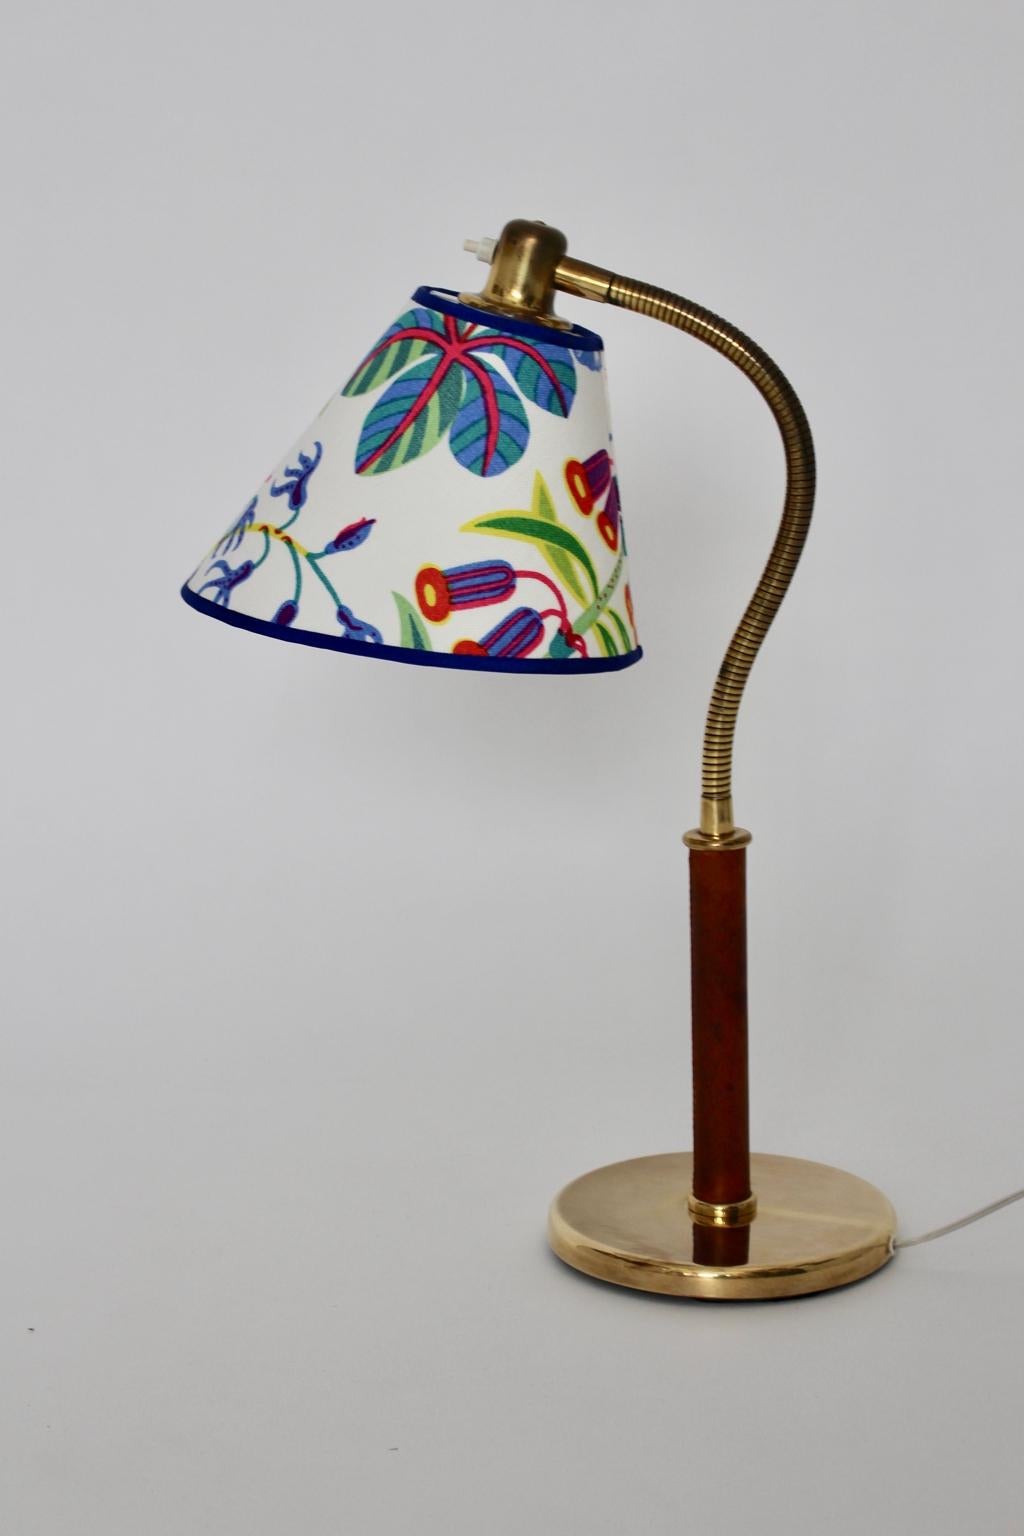 A table lamp by Josef Frank and executed by J. T. Kalmar Vienna, which has an adjustable flexible arm with a leather handle.
The renewed lampshade is covered with beautiful multicolored Josef Frank design textile fabric by Svenskt Tenn.
The table